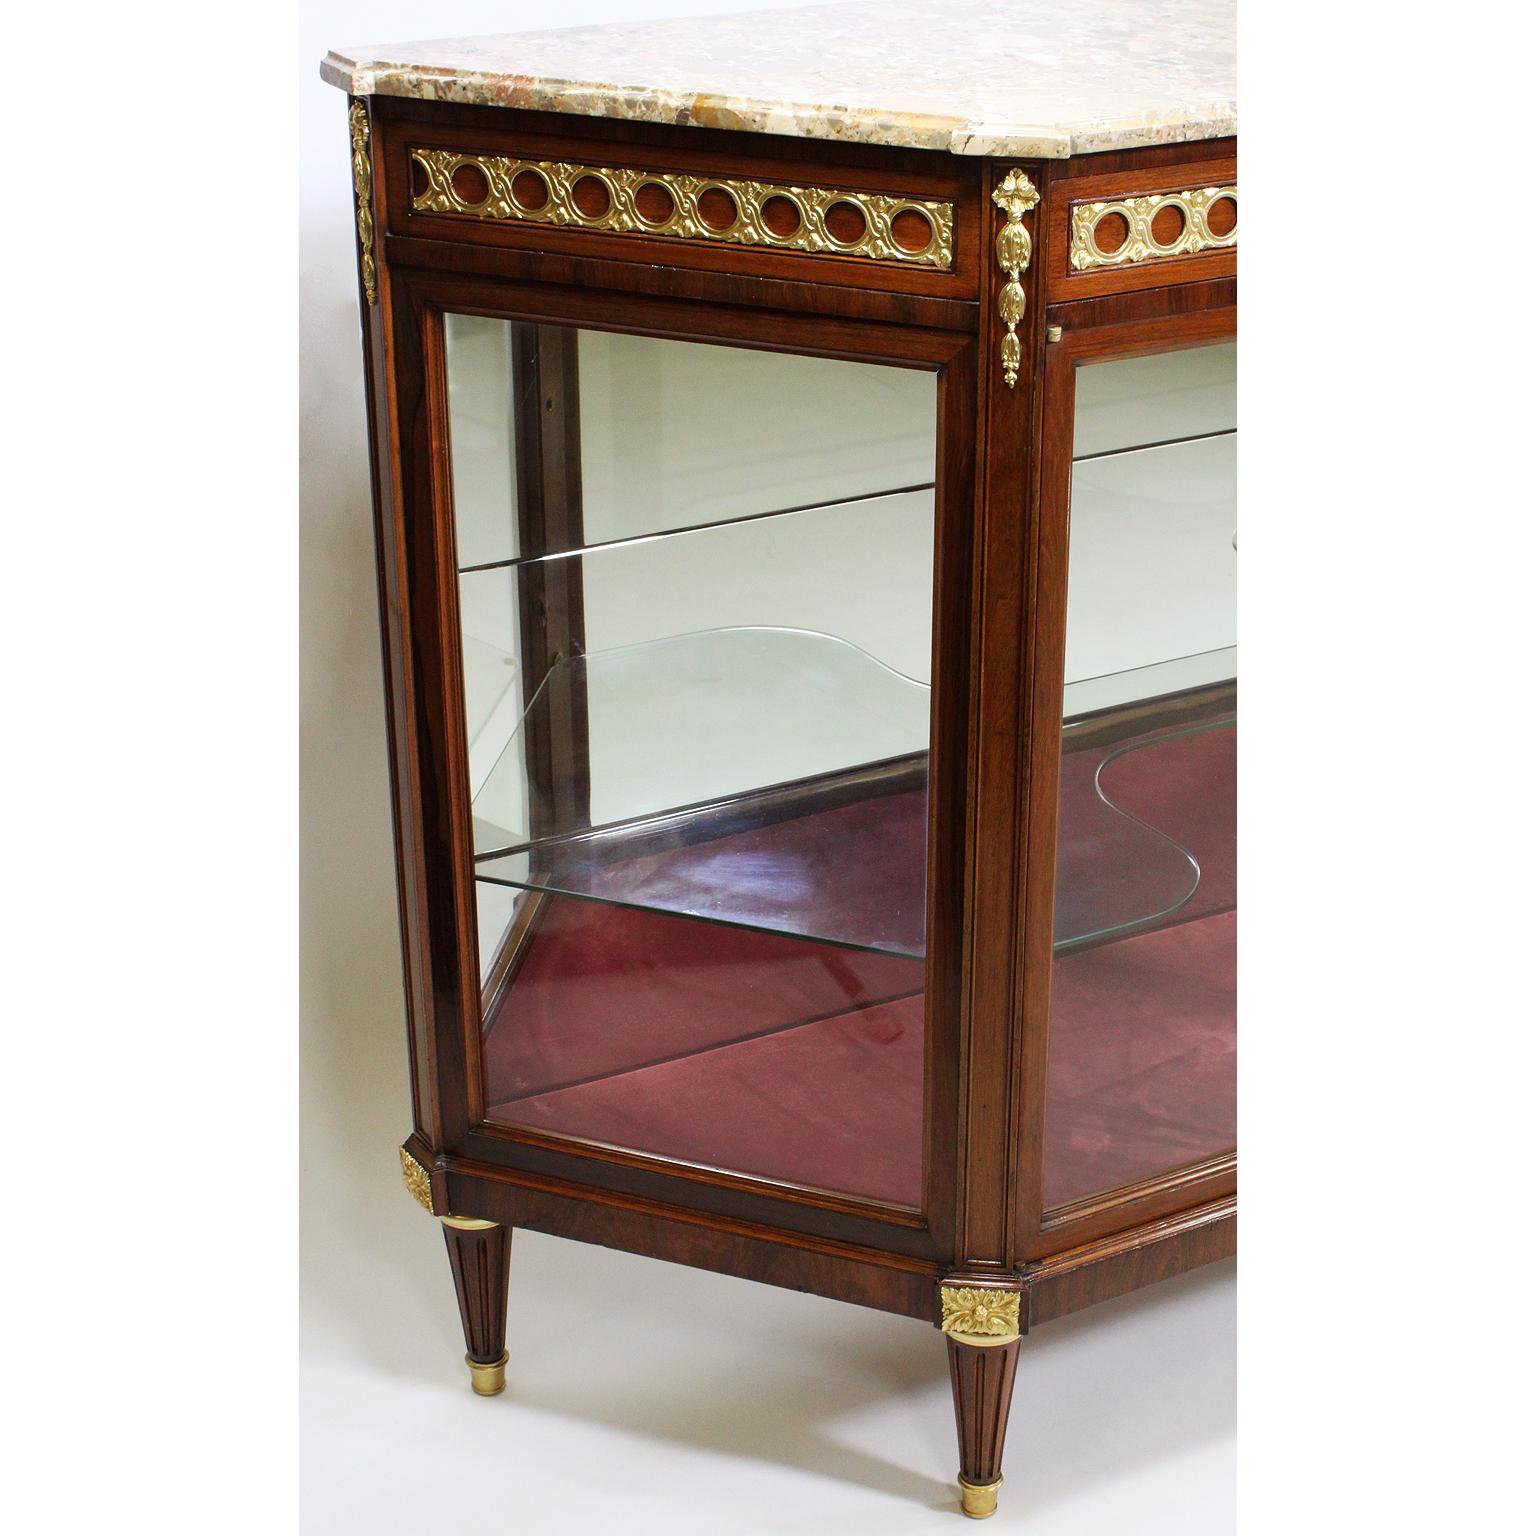 Early 20th Century French Louis XVI Style Mahogany and Gilt-Bronze Mounted Sever Exhibition Vitrine For Sale